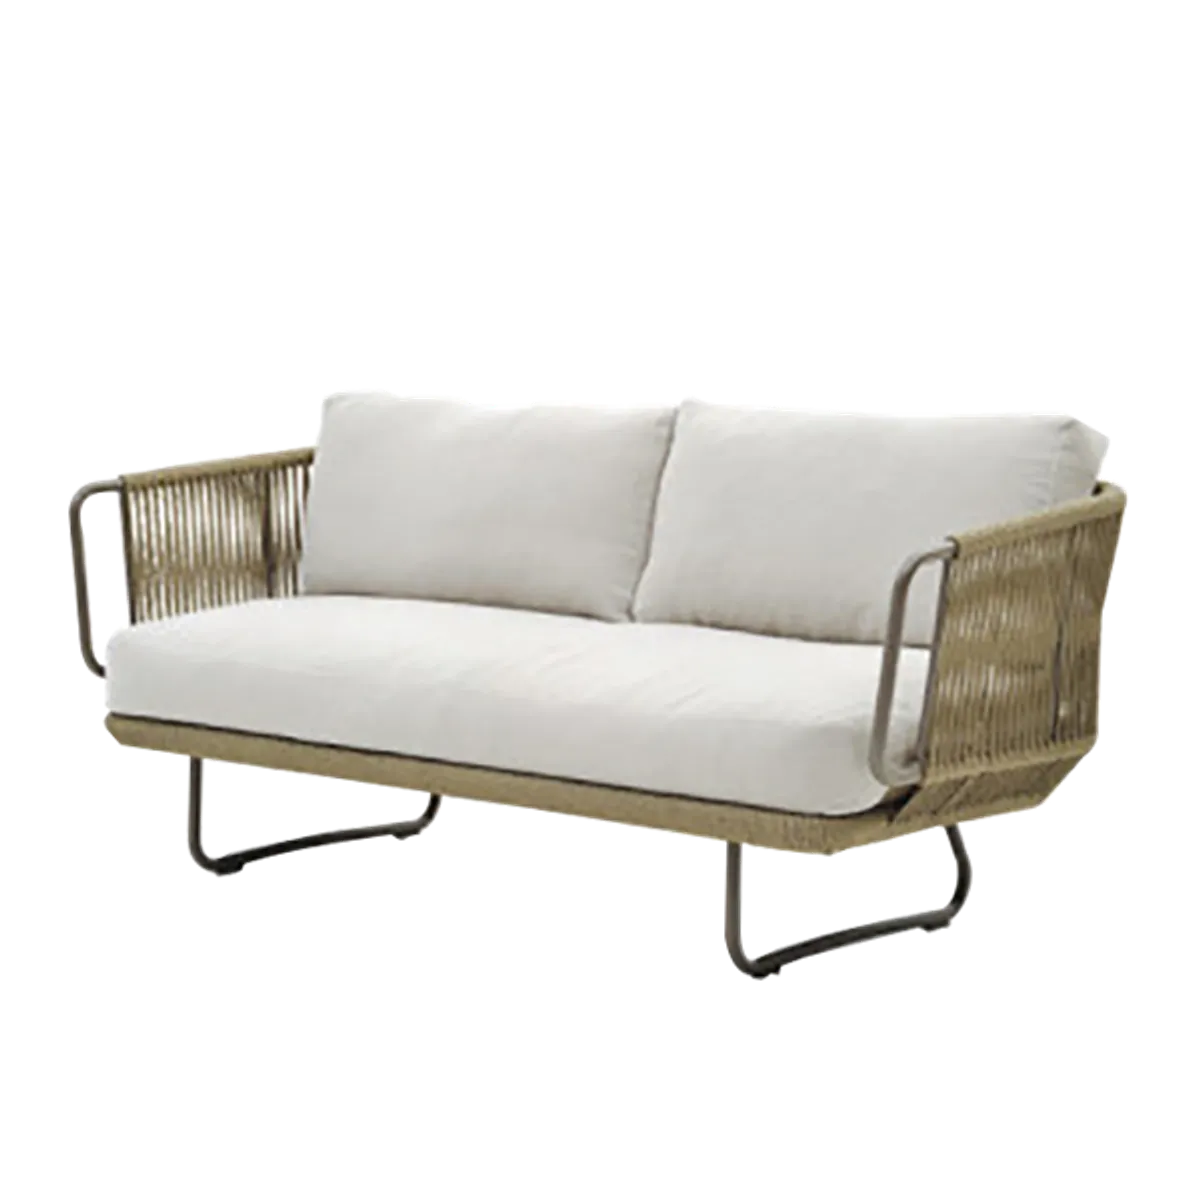 Web Babylon Sofa Outdoor Lounge Furniture For Poolside Cafes And Hotel Terraaces Insideoutcontracts 030